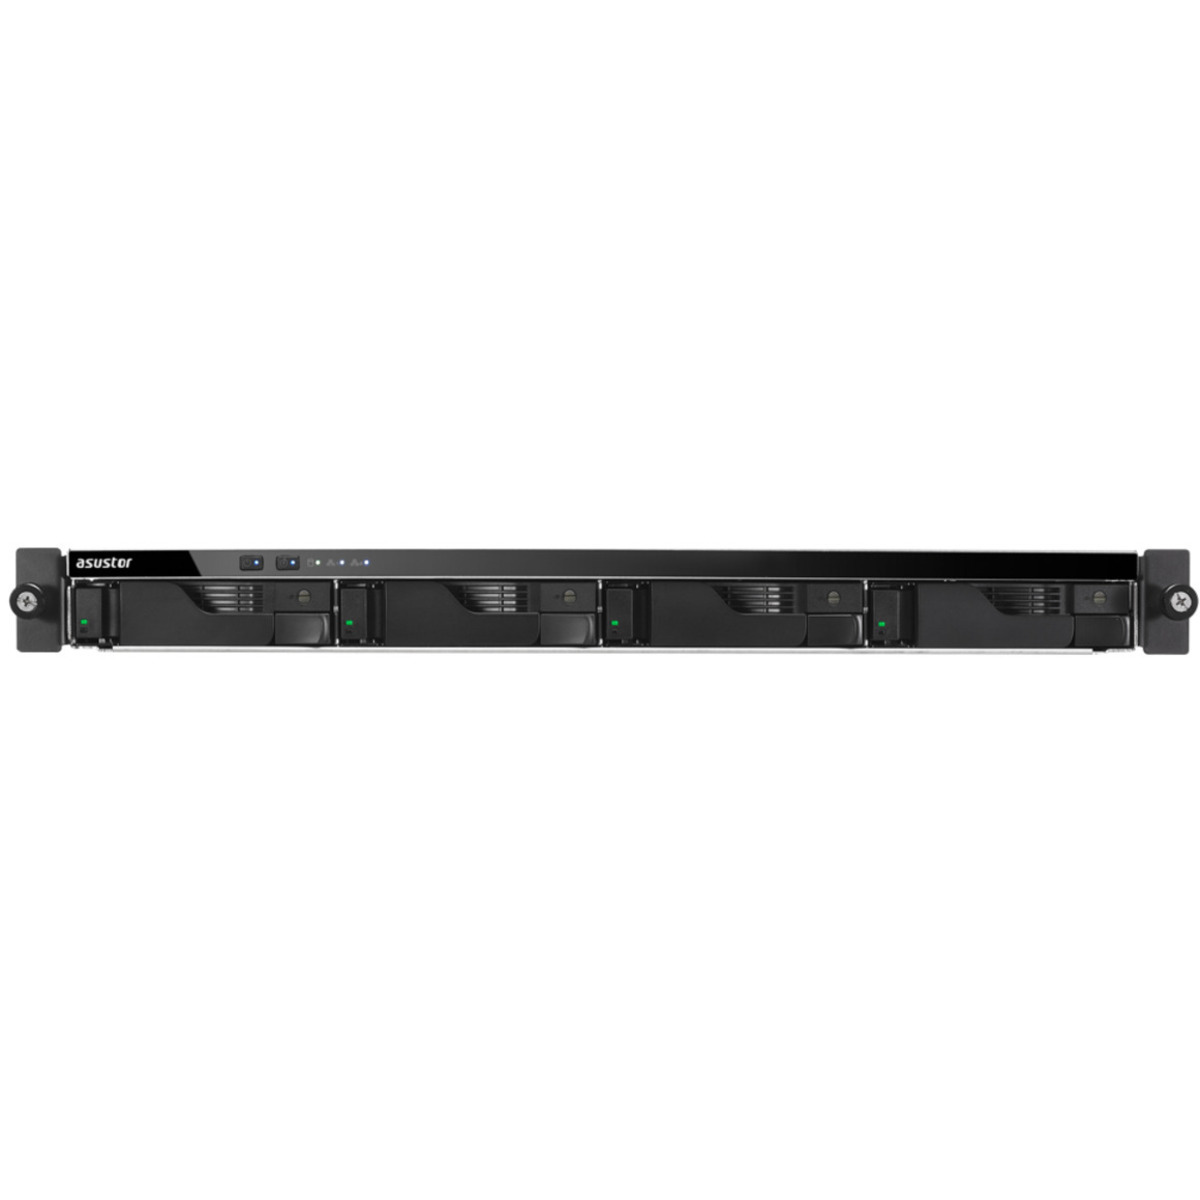 ASUSTOR LOCKERSTOR 4RS AS6504RS 16tb 4-Bay RackMount Multimedia / Power User / Business NAS - Network Attached Storage Device 2x8tb Western Digital Red Plus WD80EFPX 3.5 7200rpm SATA 6Gb/s HDD NAS Class Drives Installed - Burn-In Tested - FREE RAM UPGRADE LOCKERSTOR 4RS AS6504RS